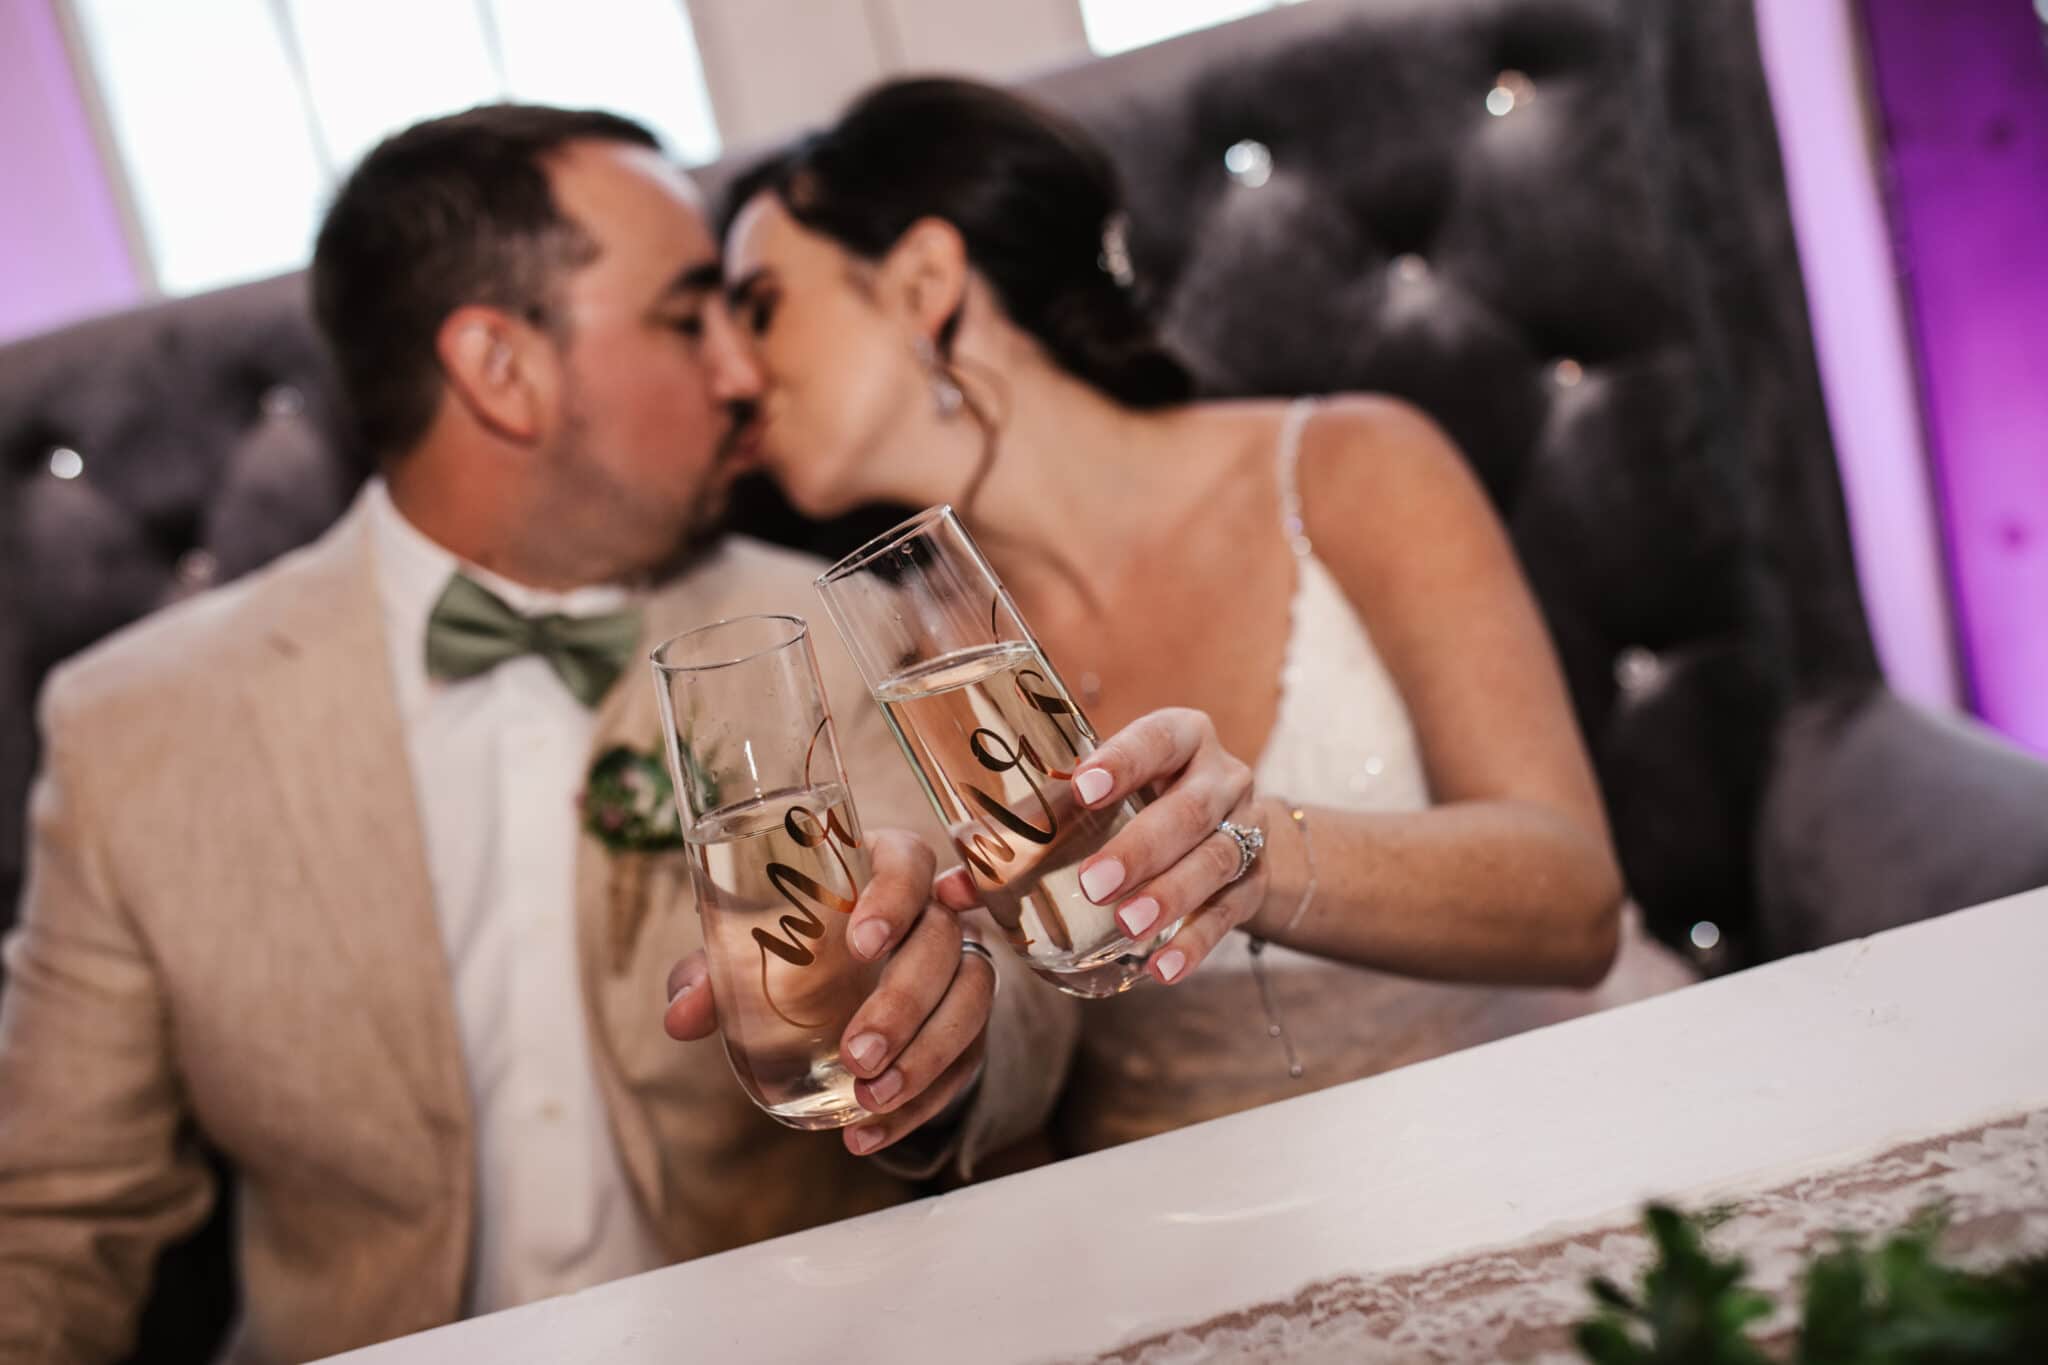 the bride and groom kissing and holding their mr. and mrs. glasses together.